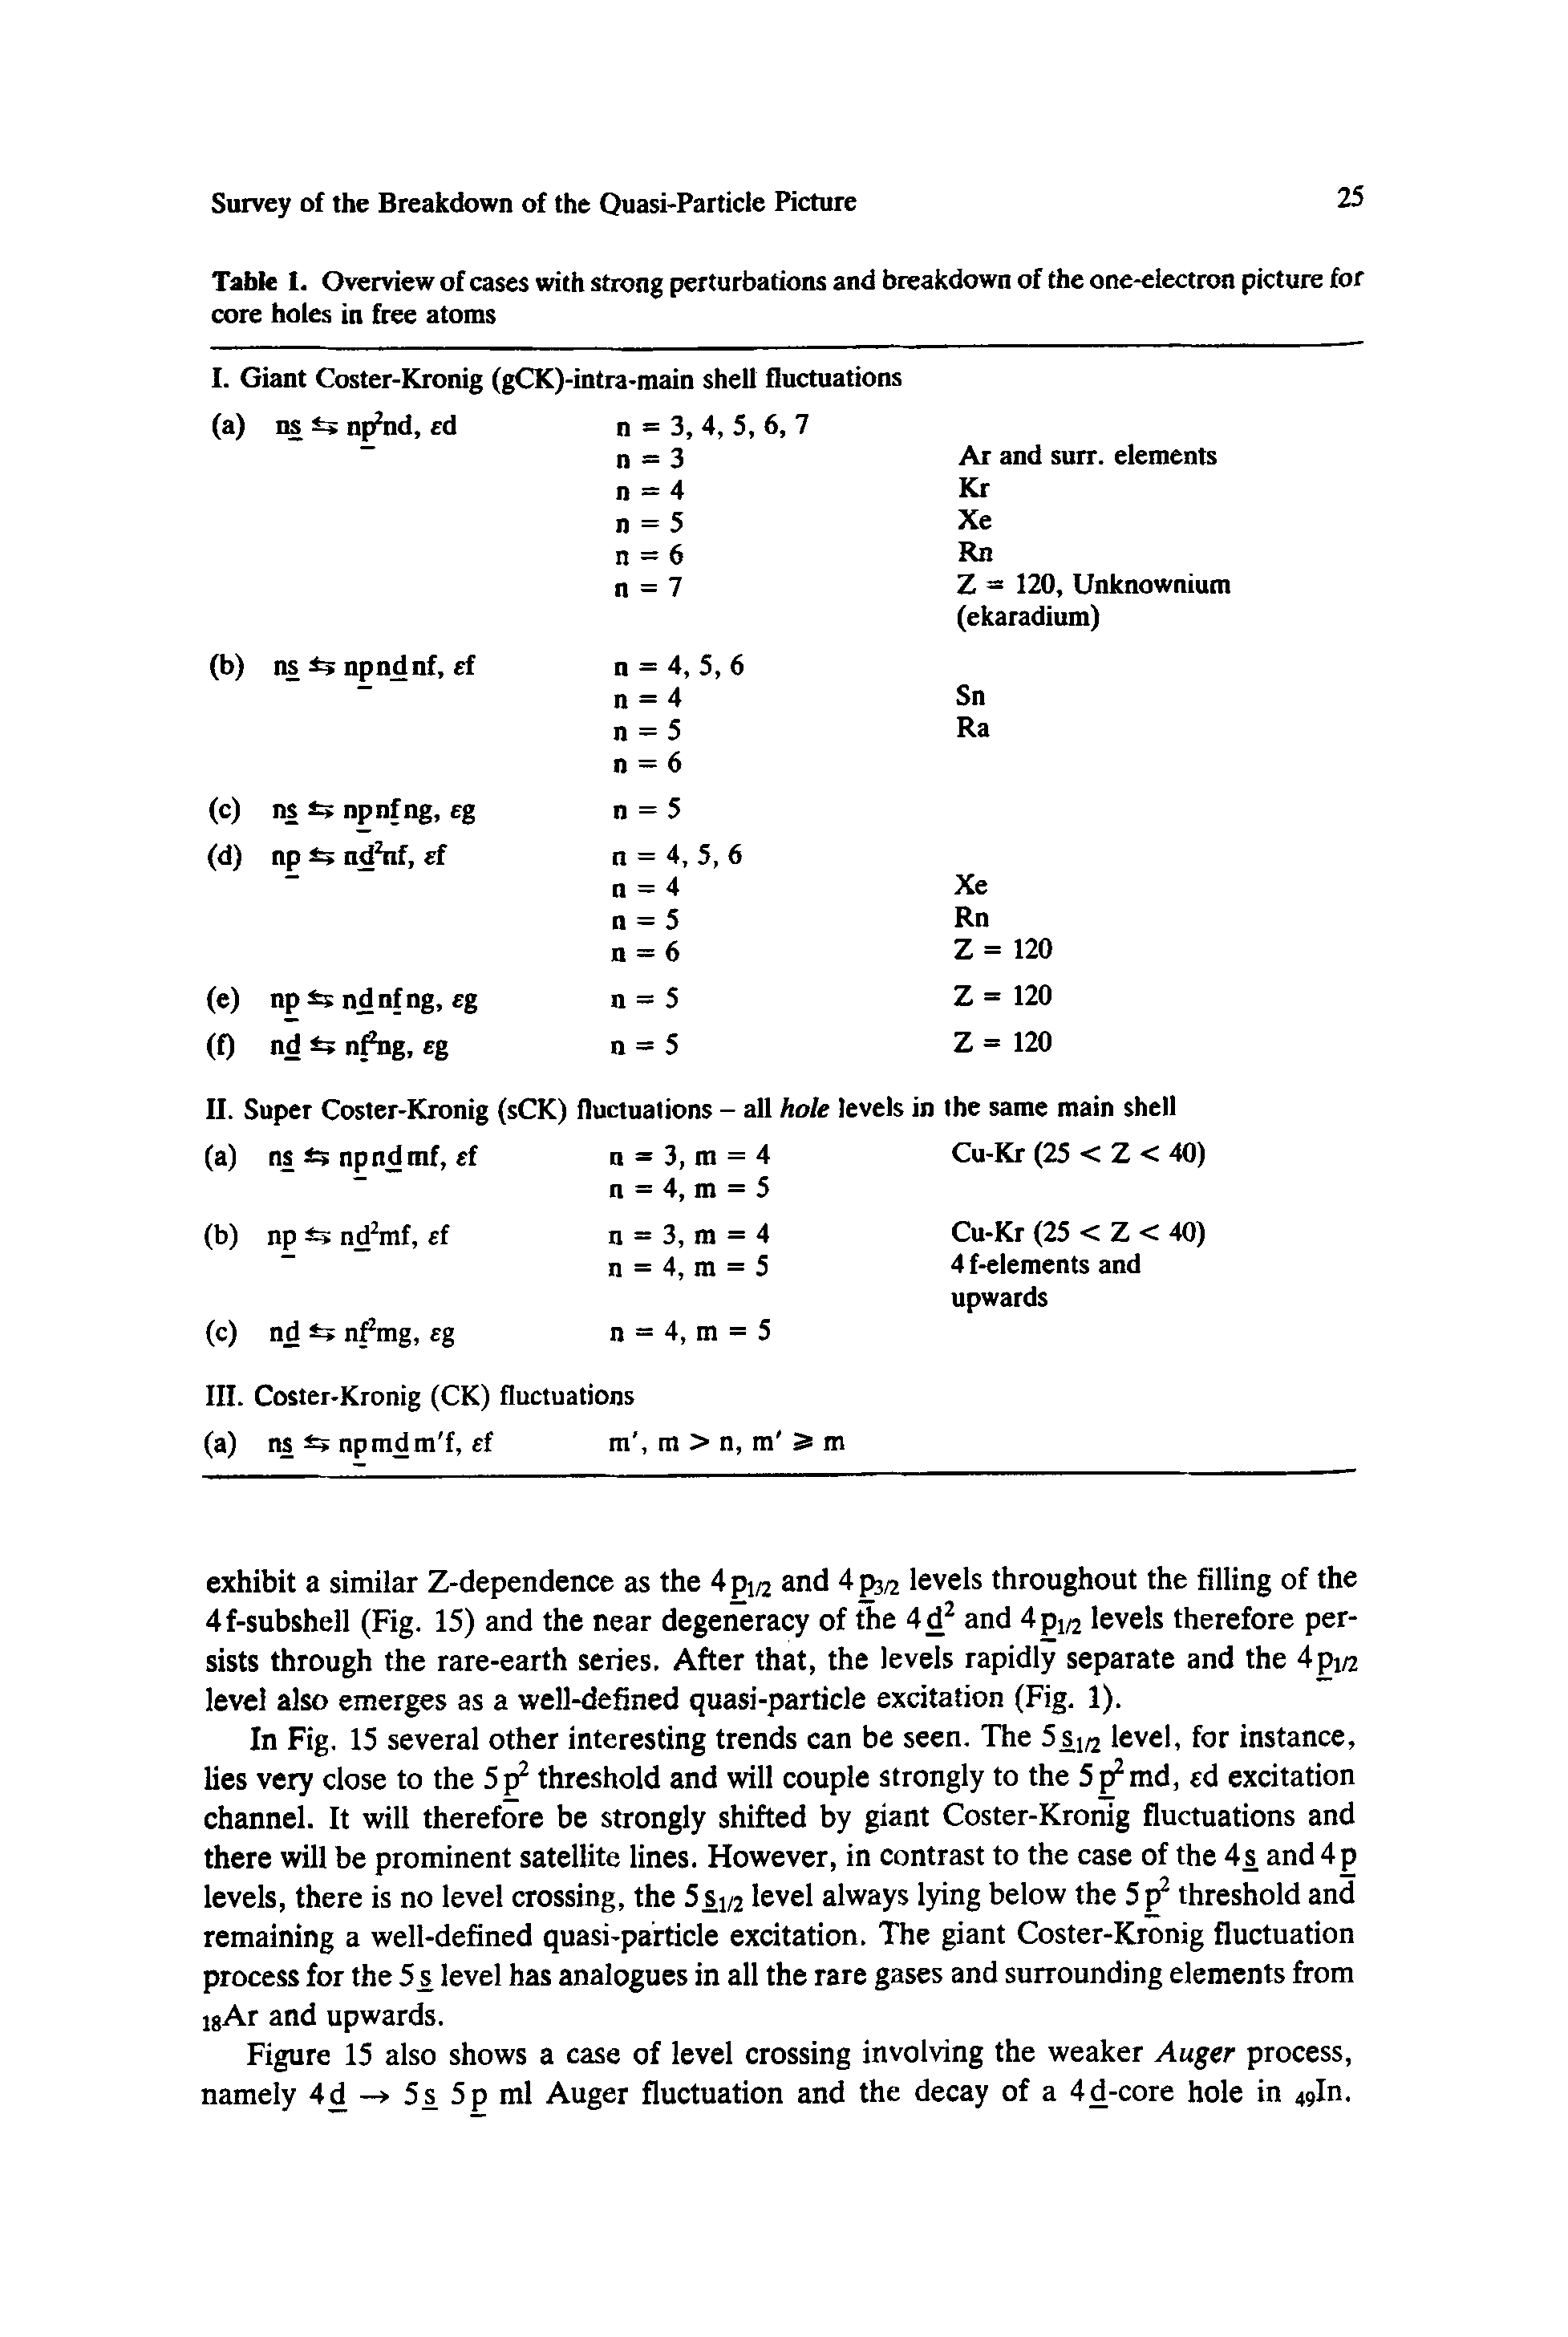 Table I. Overview of cases with strong perturbations and breakdown of the one-electron picture for core holes in free atoms...